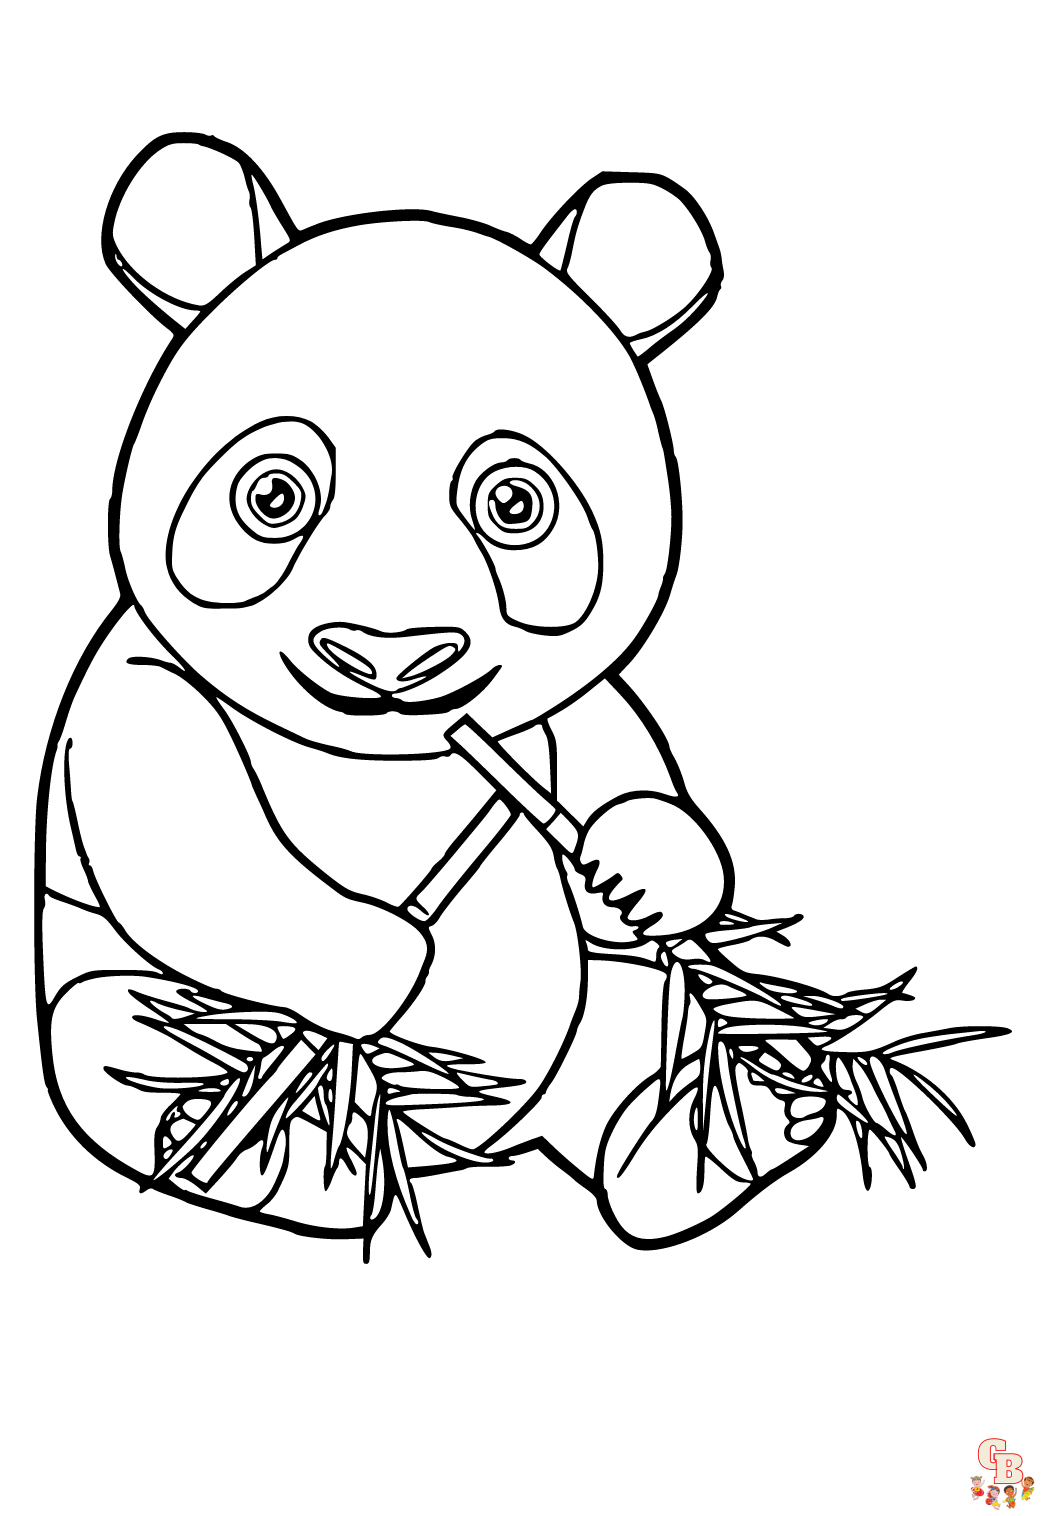 Coloriage Kawaii Animaux Chat, Lapin, Chien, Panda, Ours, Renard Hamster